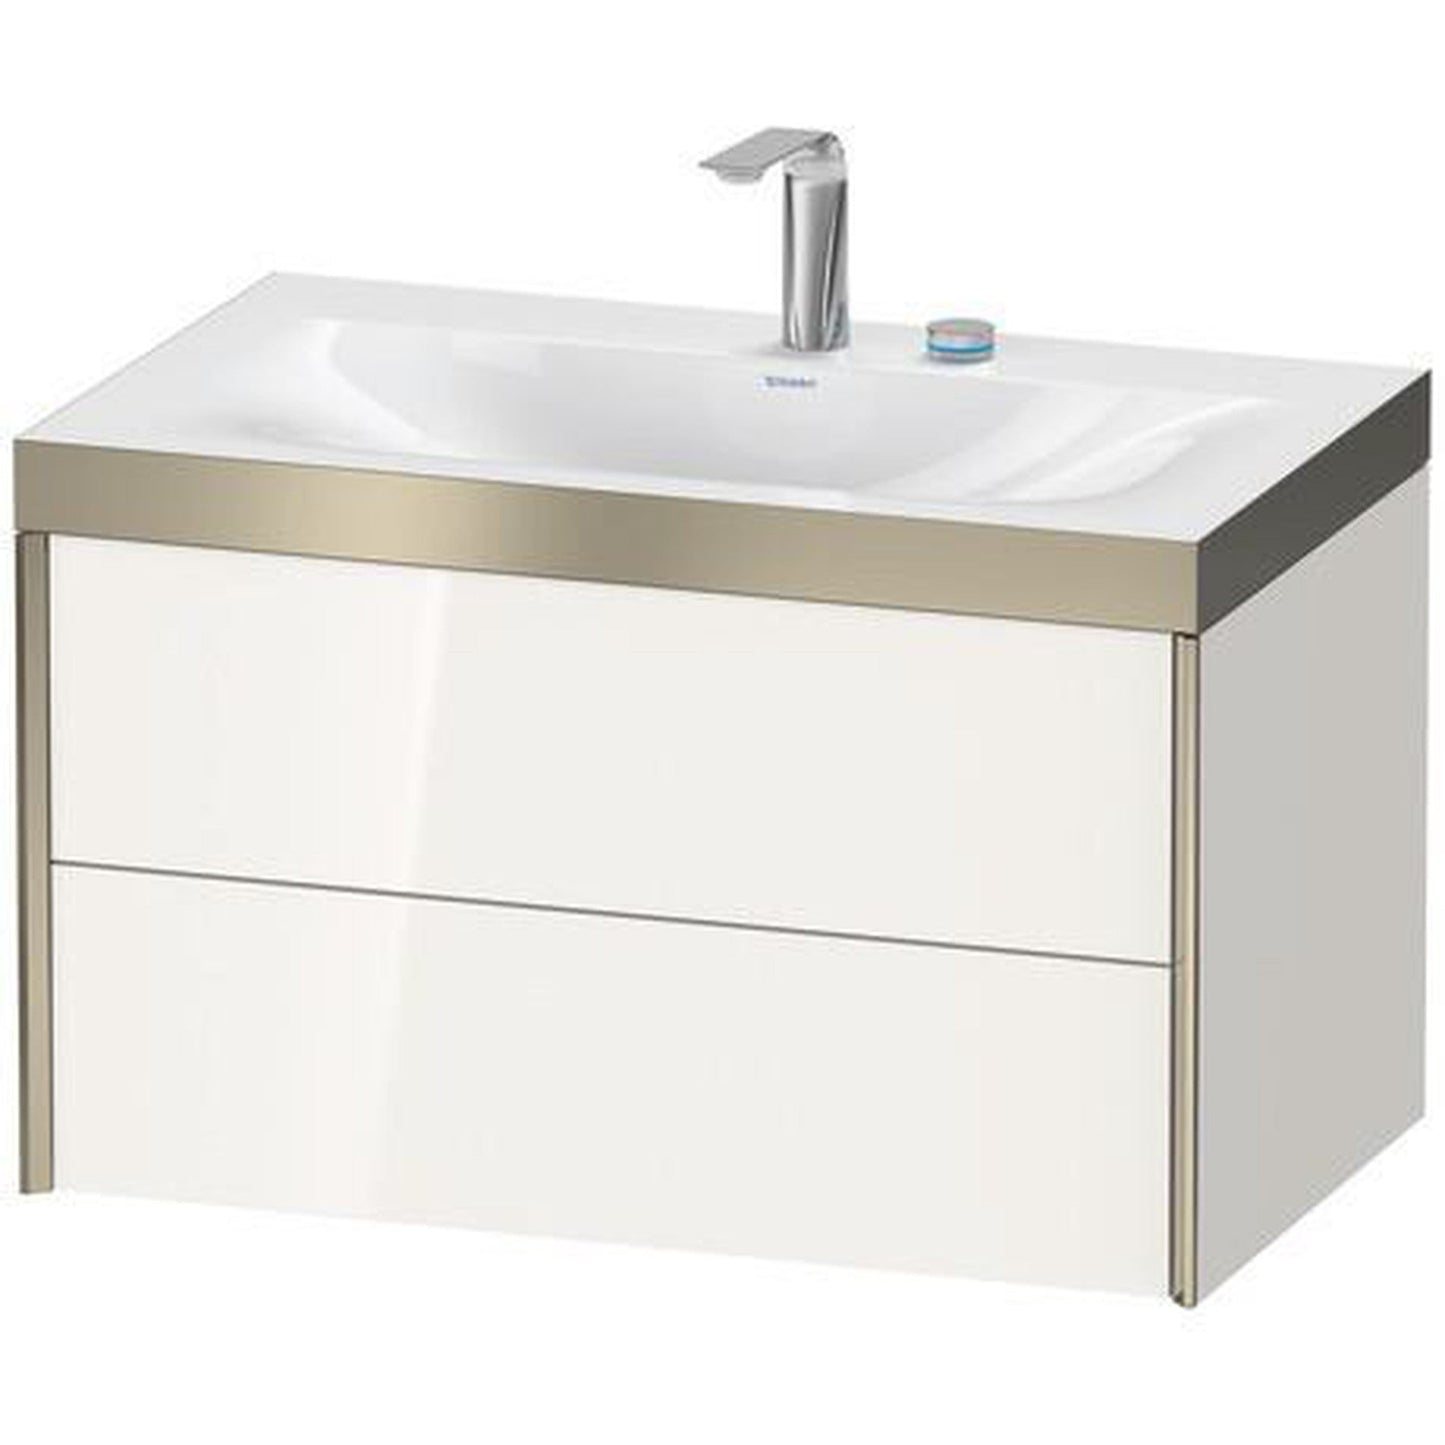 Duravit Xviu 31" x 20" x 19" Two Drawer C-Bonded Wall-Mount Vanity Kit With Two Tap Holes, White (XV4615EB122P)